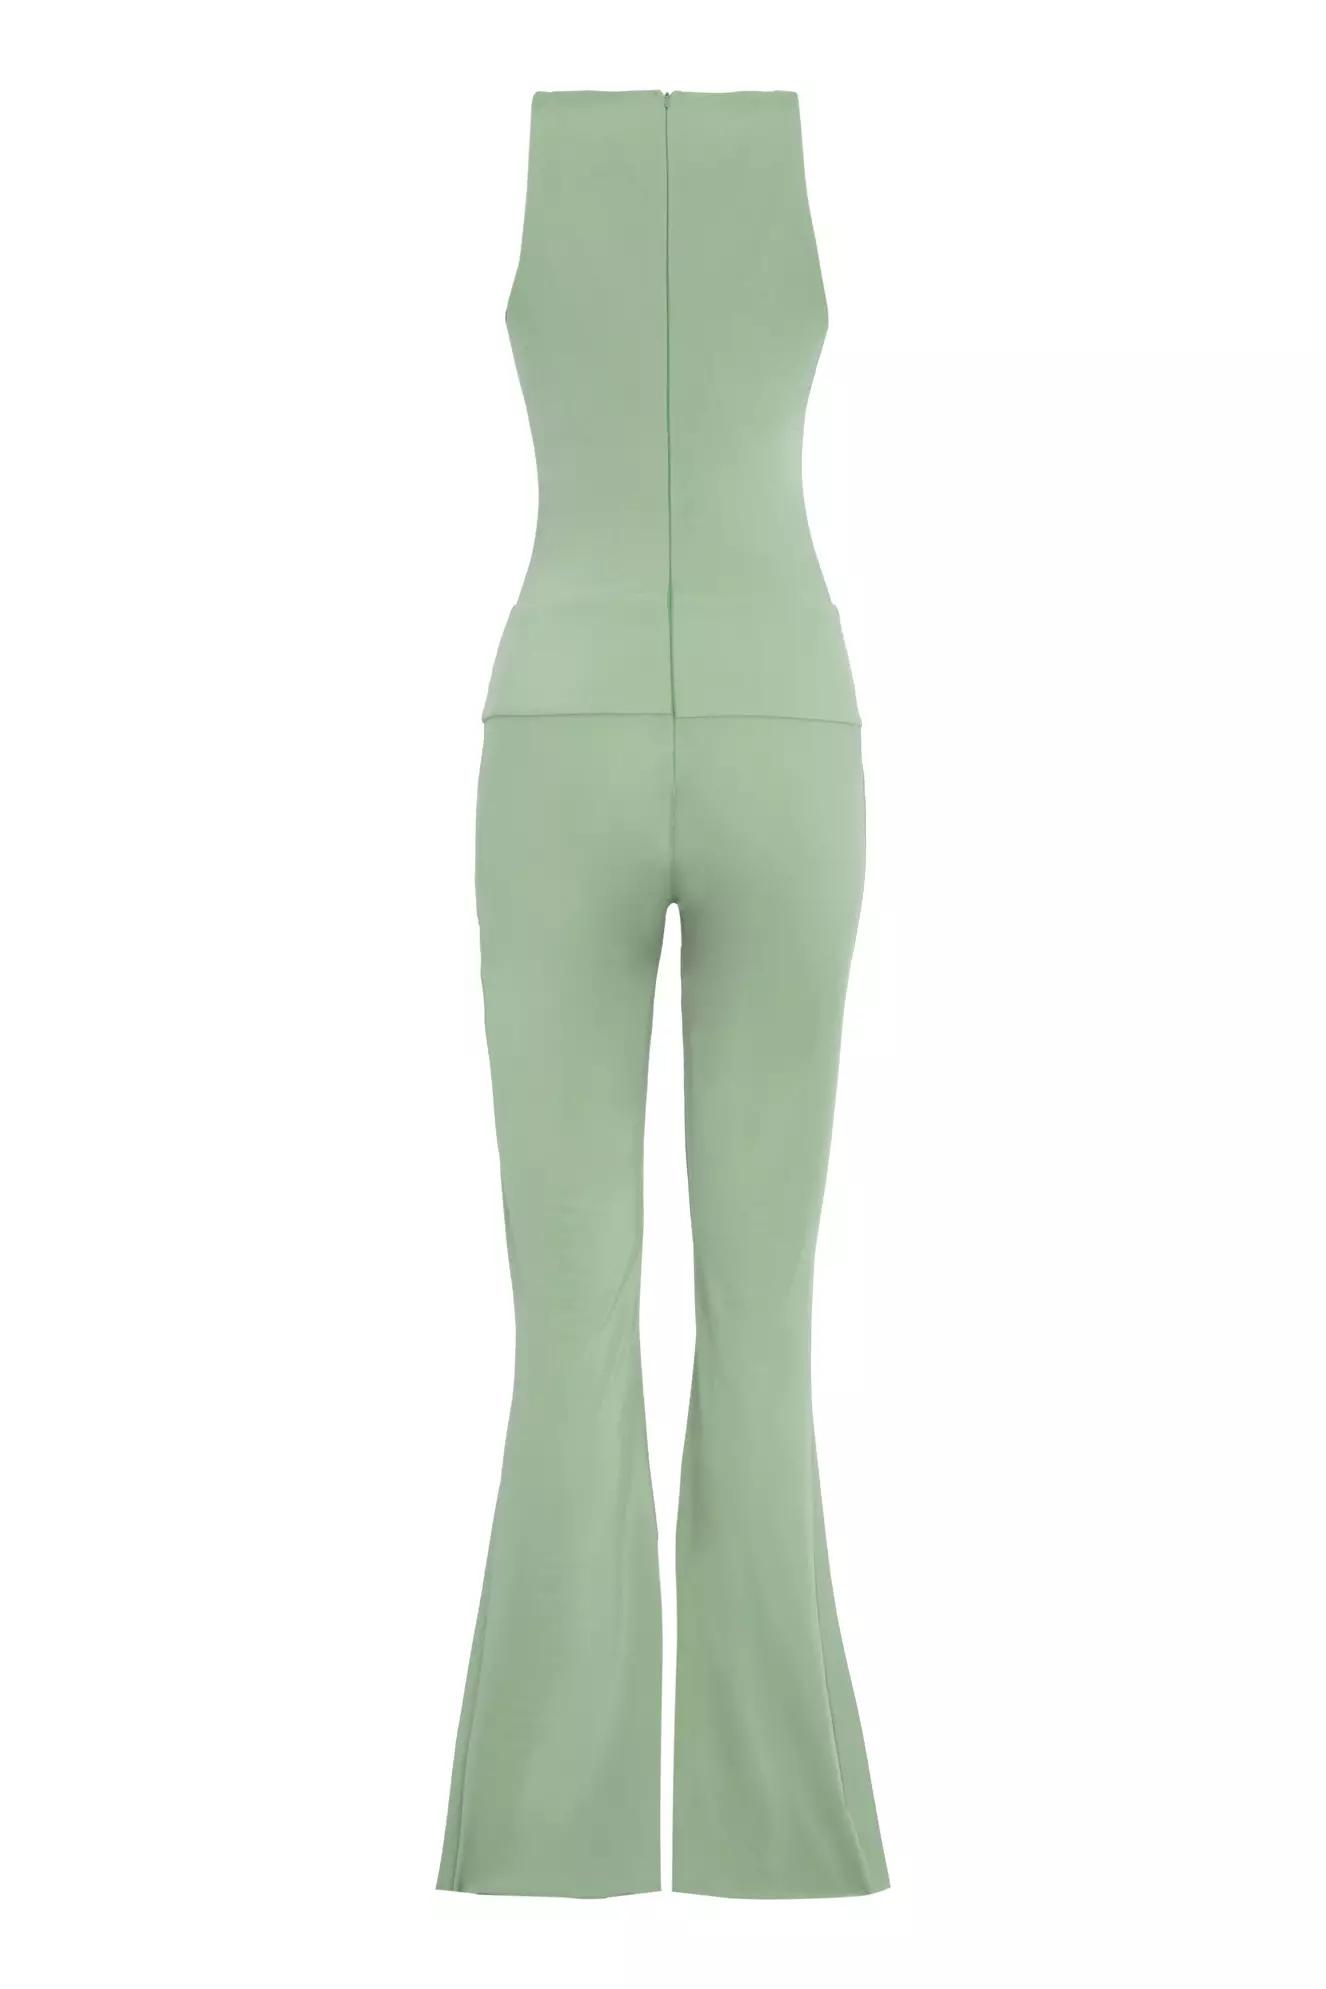 Green knitted sleeveless long suit